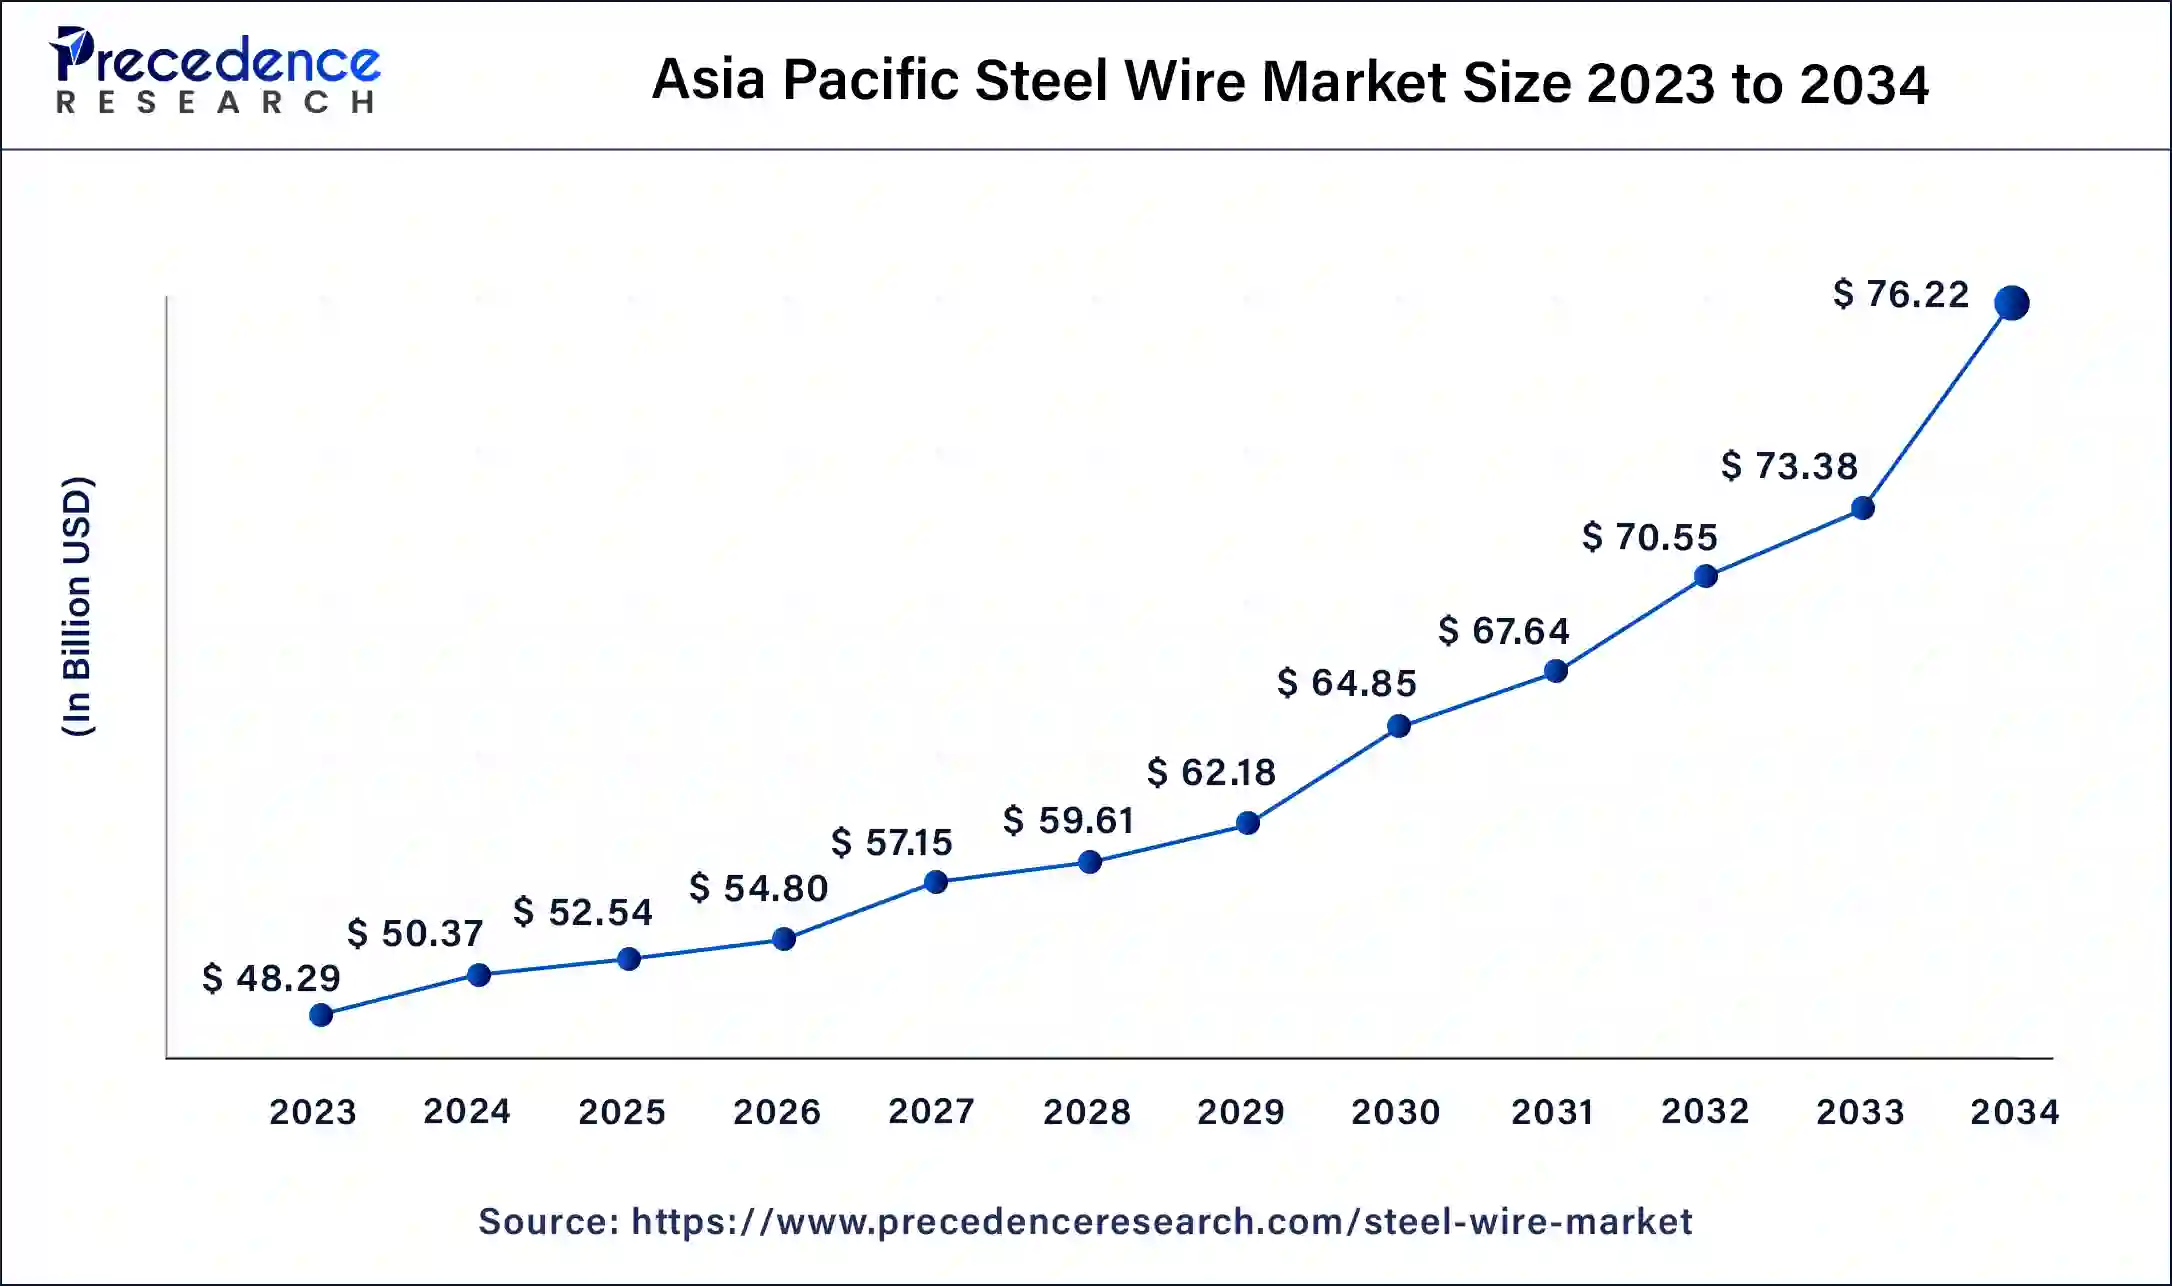 Asia Pacific Steel Wire Market Size 2024 to 2034